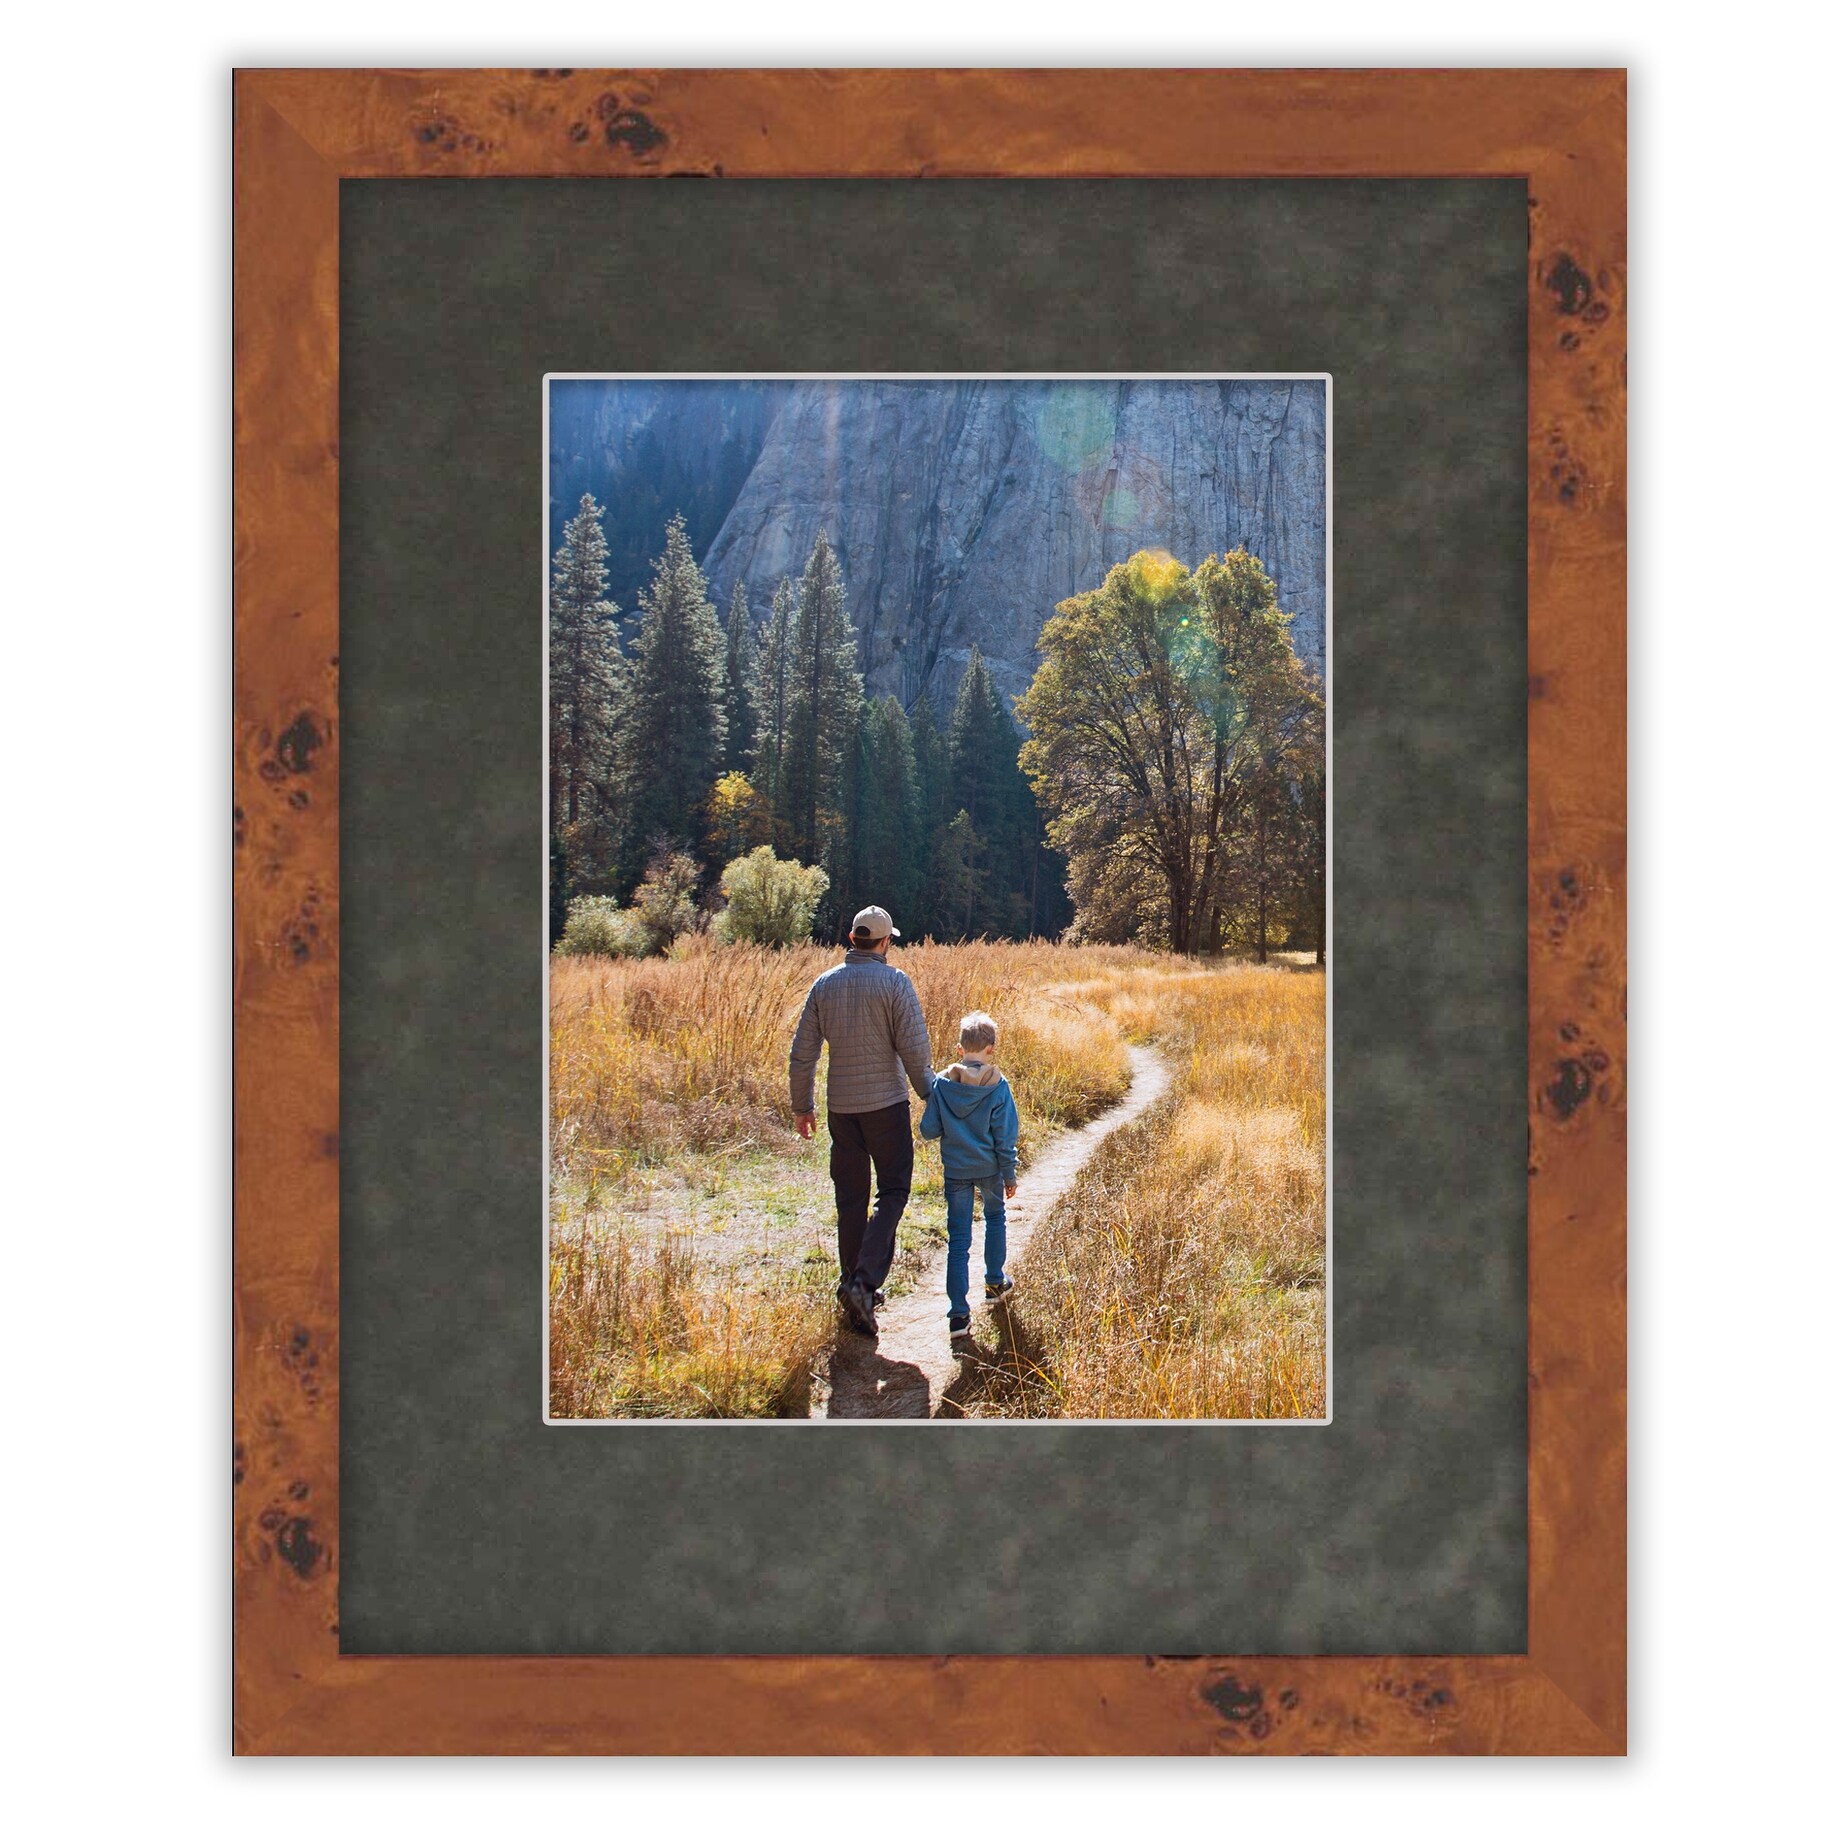 8x10 Mat for 5x7 Photo - Precut Grey Picture Matboard for Frames Measuring  8 x 10 Inches - Bevel Cut Matte to Display Art Measuring 5 x 7 Inches 